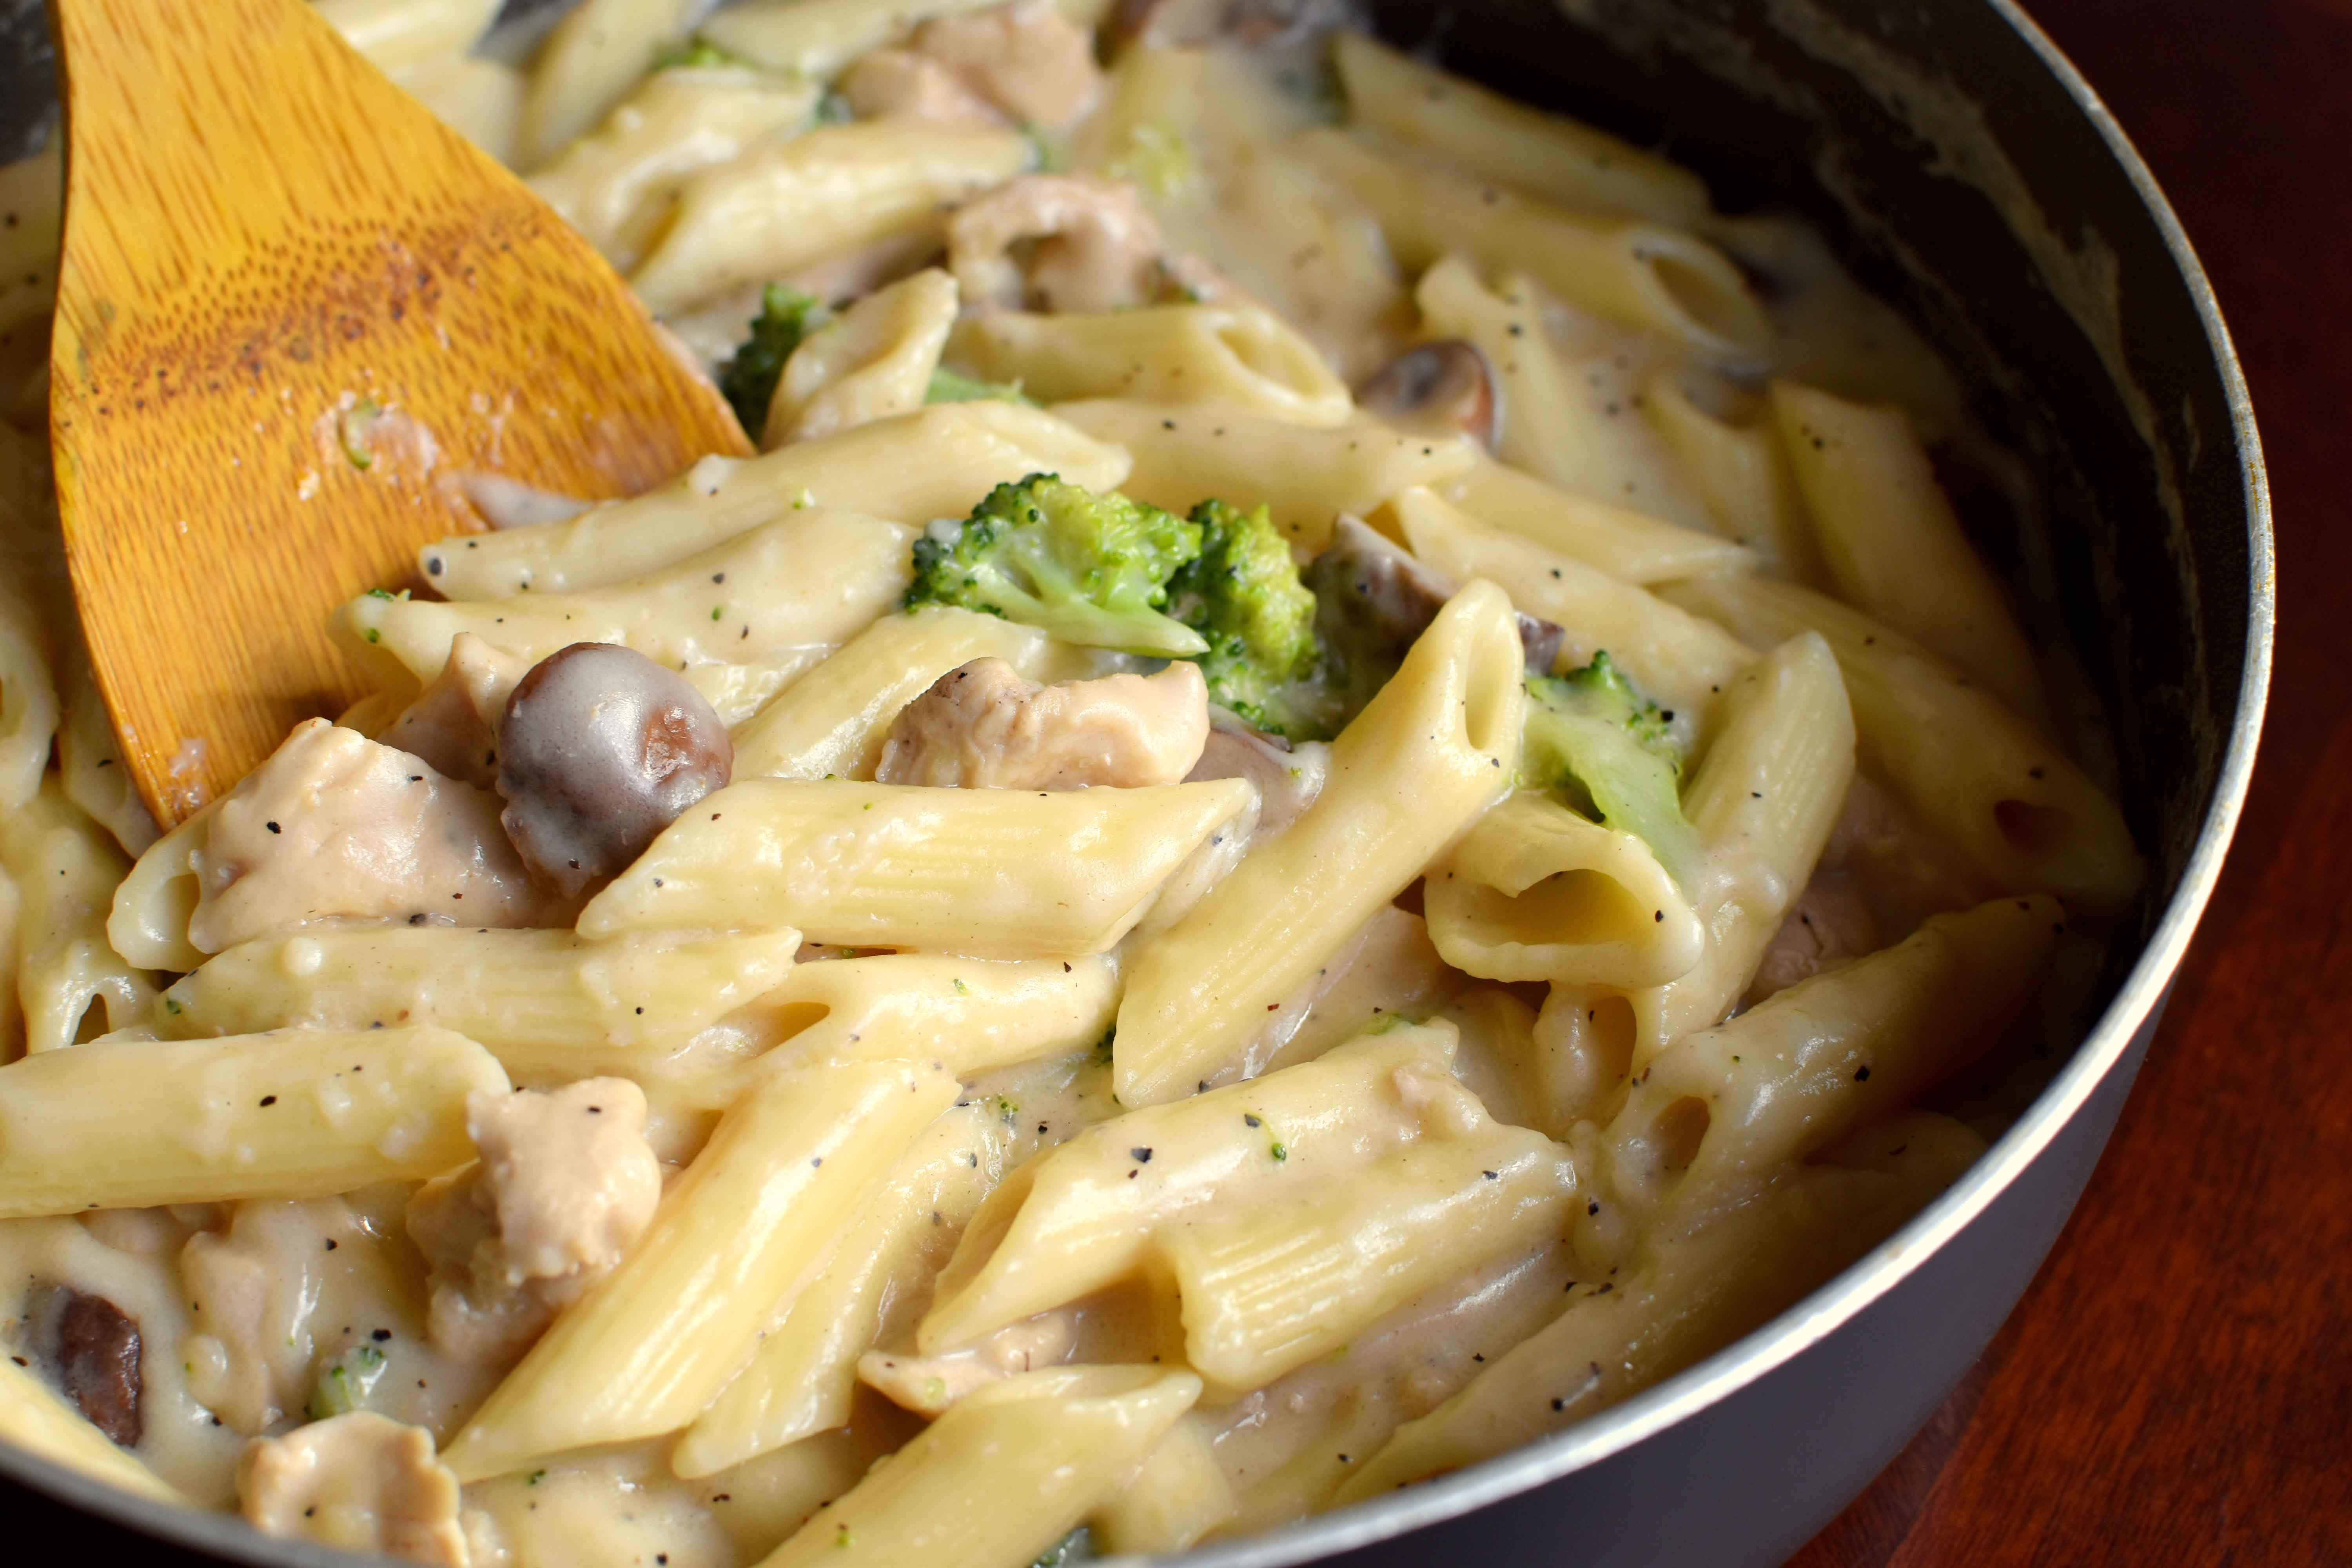 Chicken Pasta with White Sauce - Pepper Delight